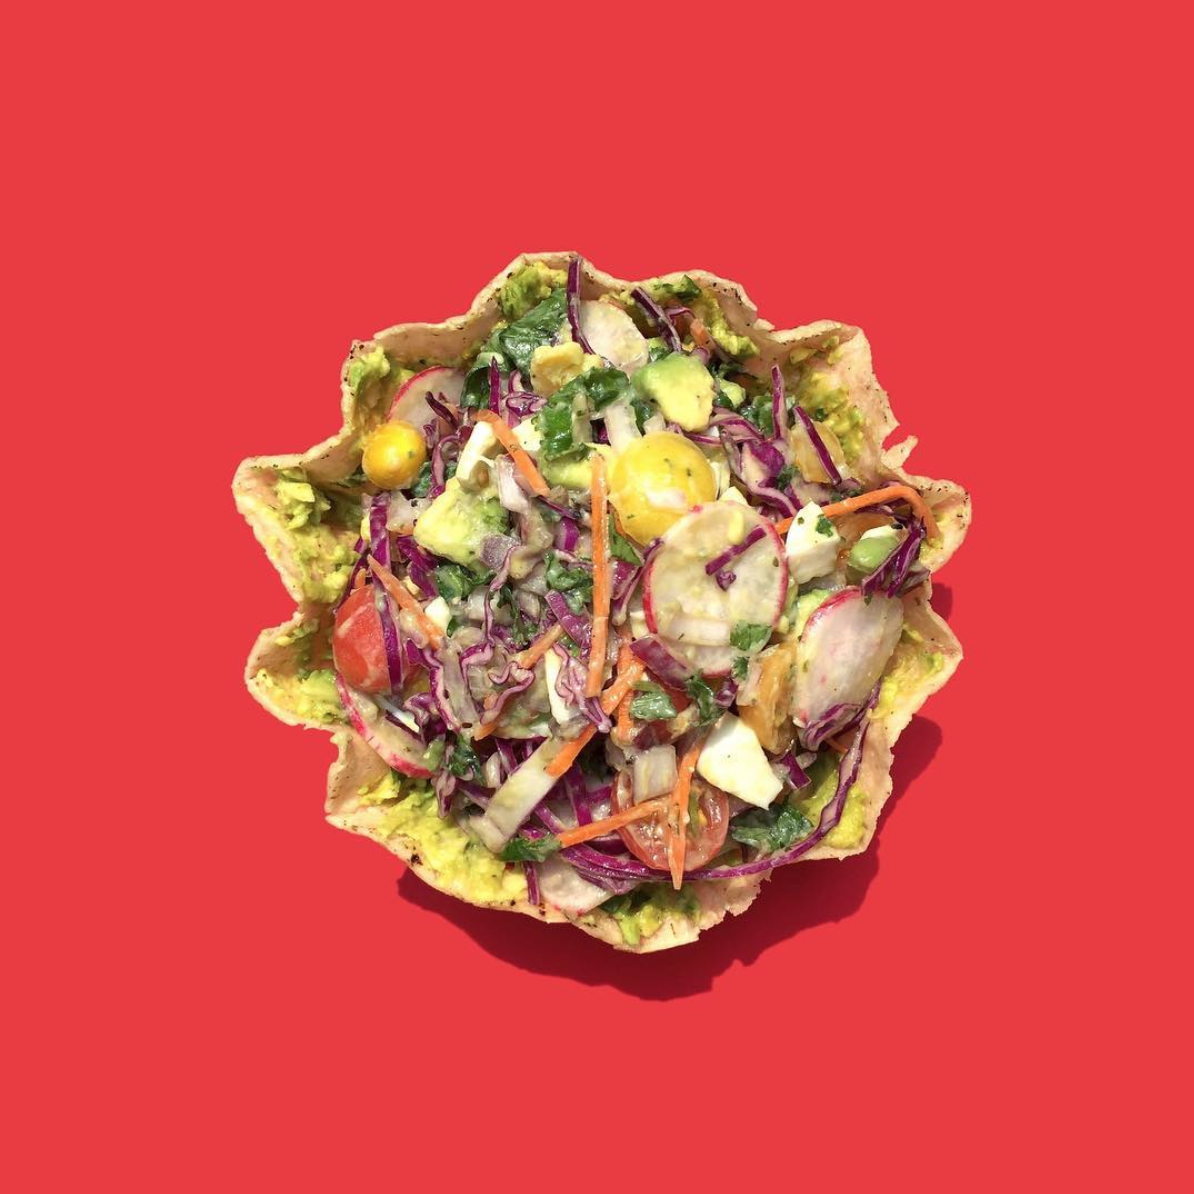 amy_chen_design_taco_shell_salad_healthy_vegan_vegetarian_colorful_food_styling_photography